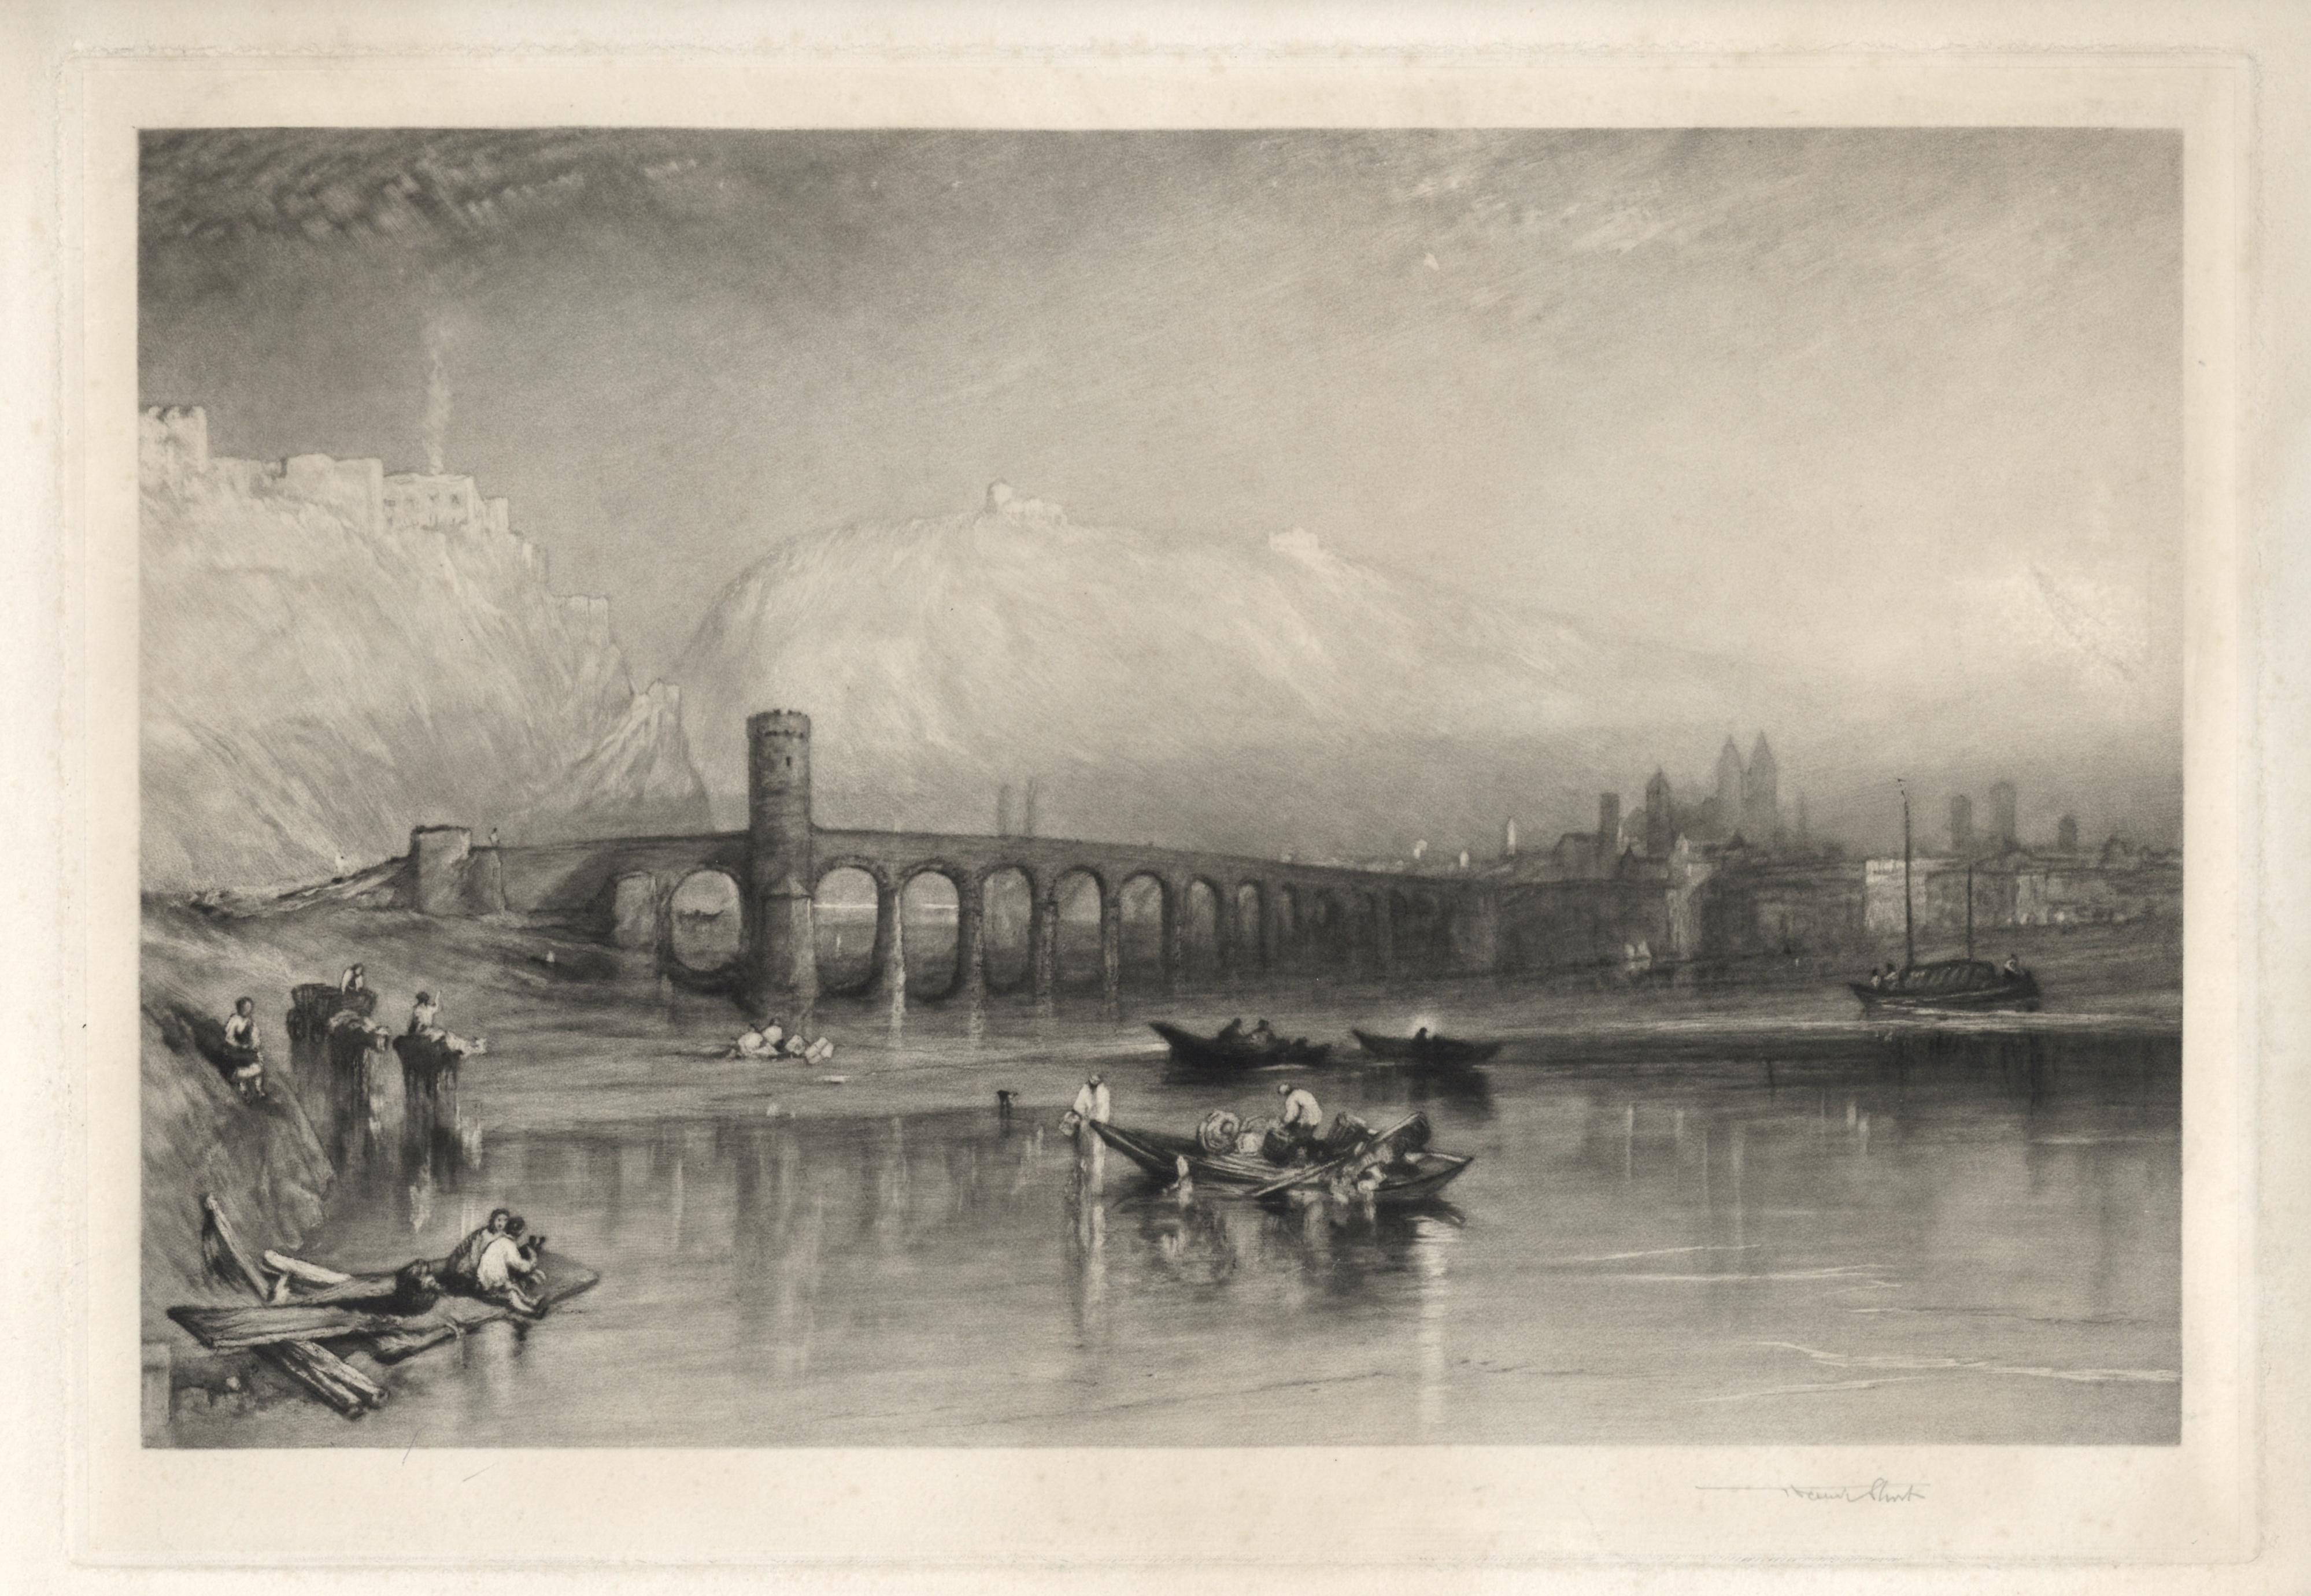 Medium: mezzotint. Catalogue reference: Hardie 95. Executed in 1913 by Sir Frank Short after J. M. W. Turner and signed in pencil by Sir Frank Short. Printed on chine-collé paper in an edition of 50. Plate size: 10 7/8 x 15 3/4 inches. Some consider